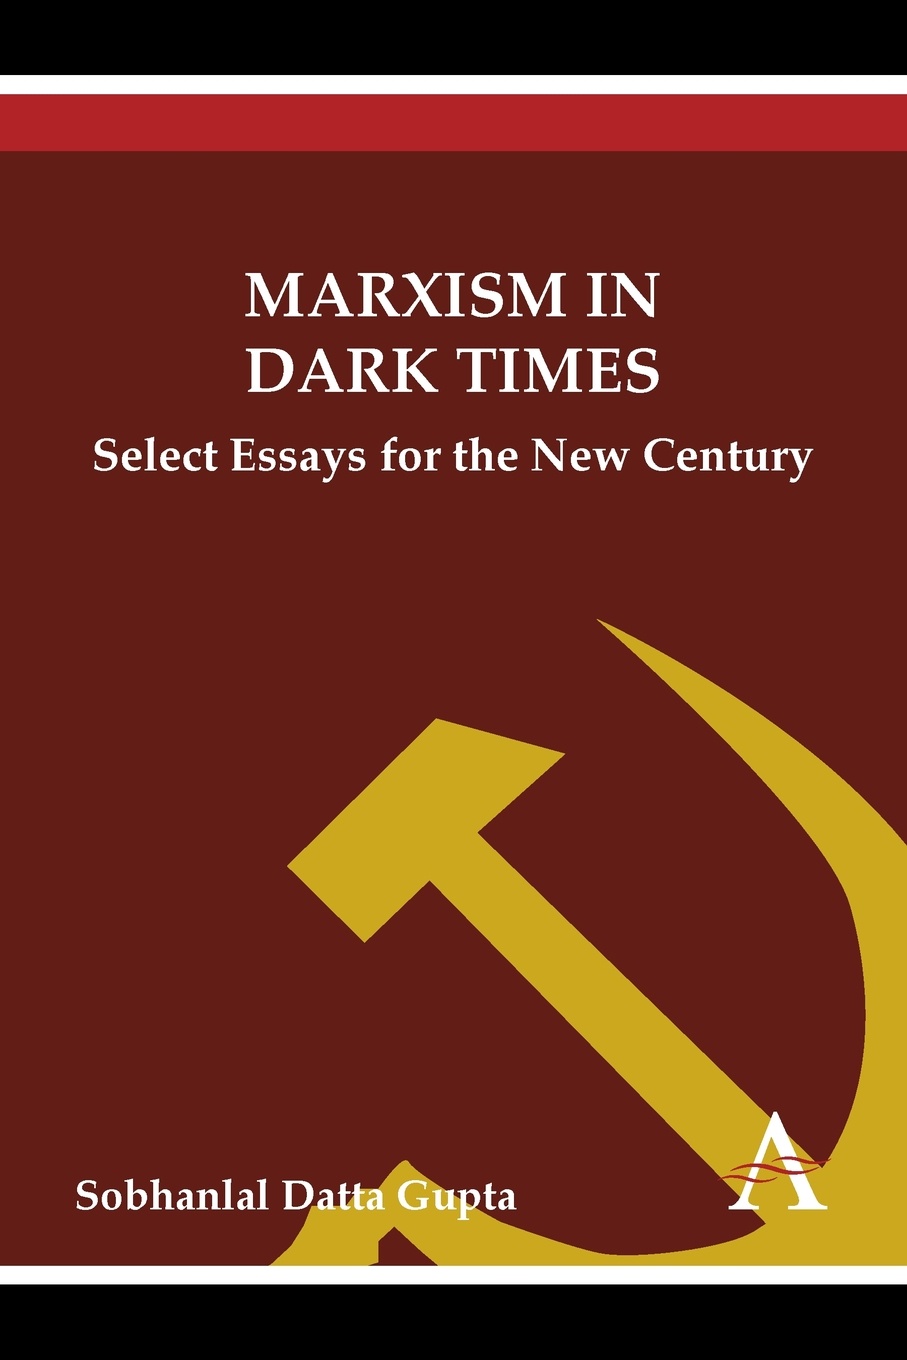 Marxism in Dark Times. Select Essays for the New Century